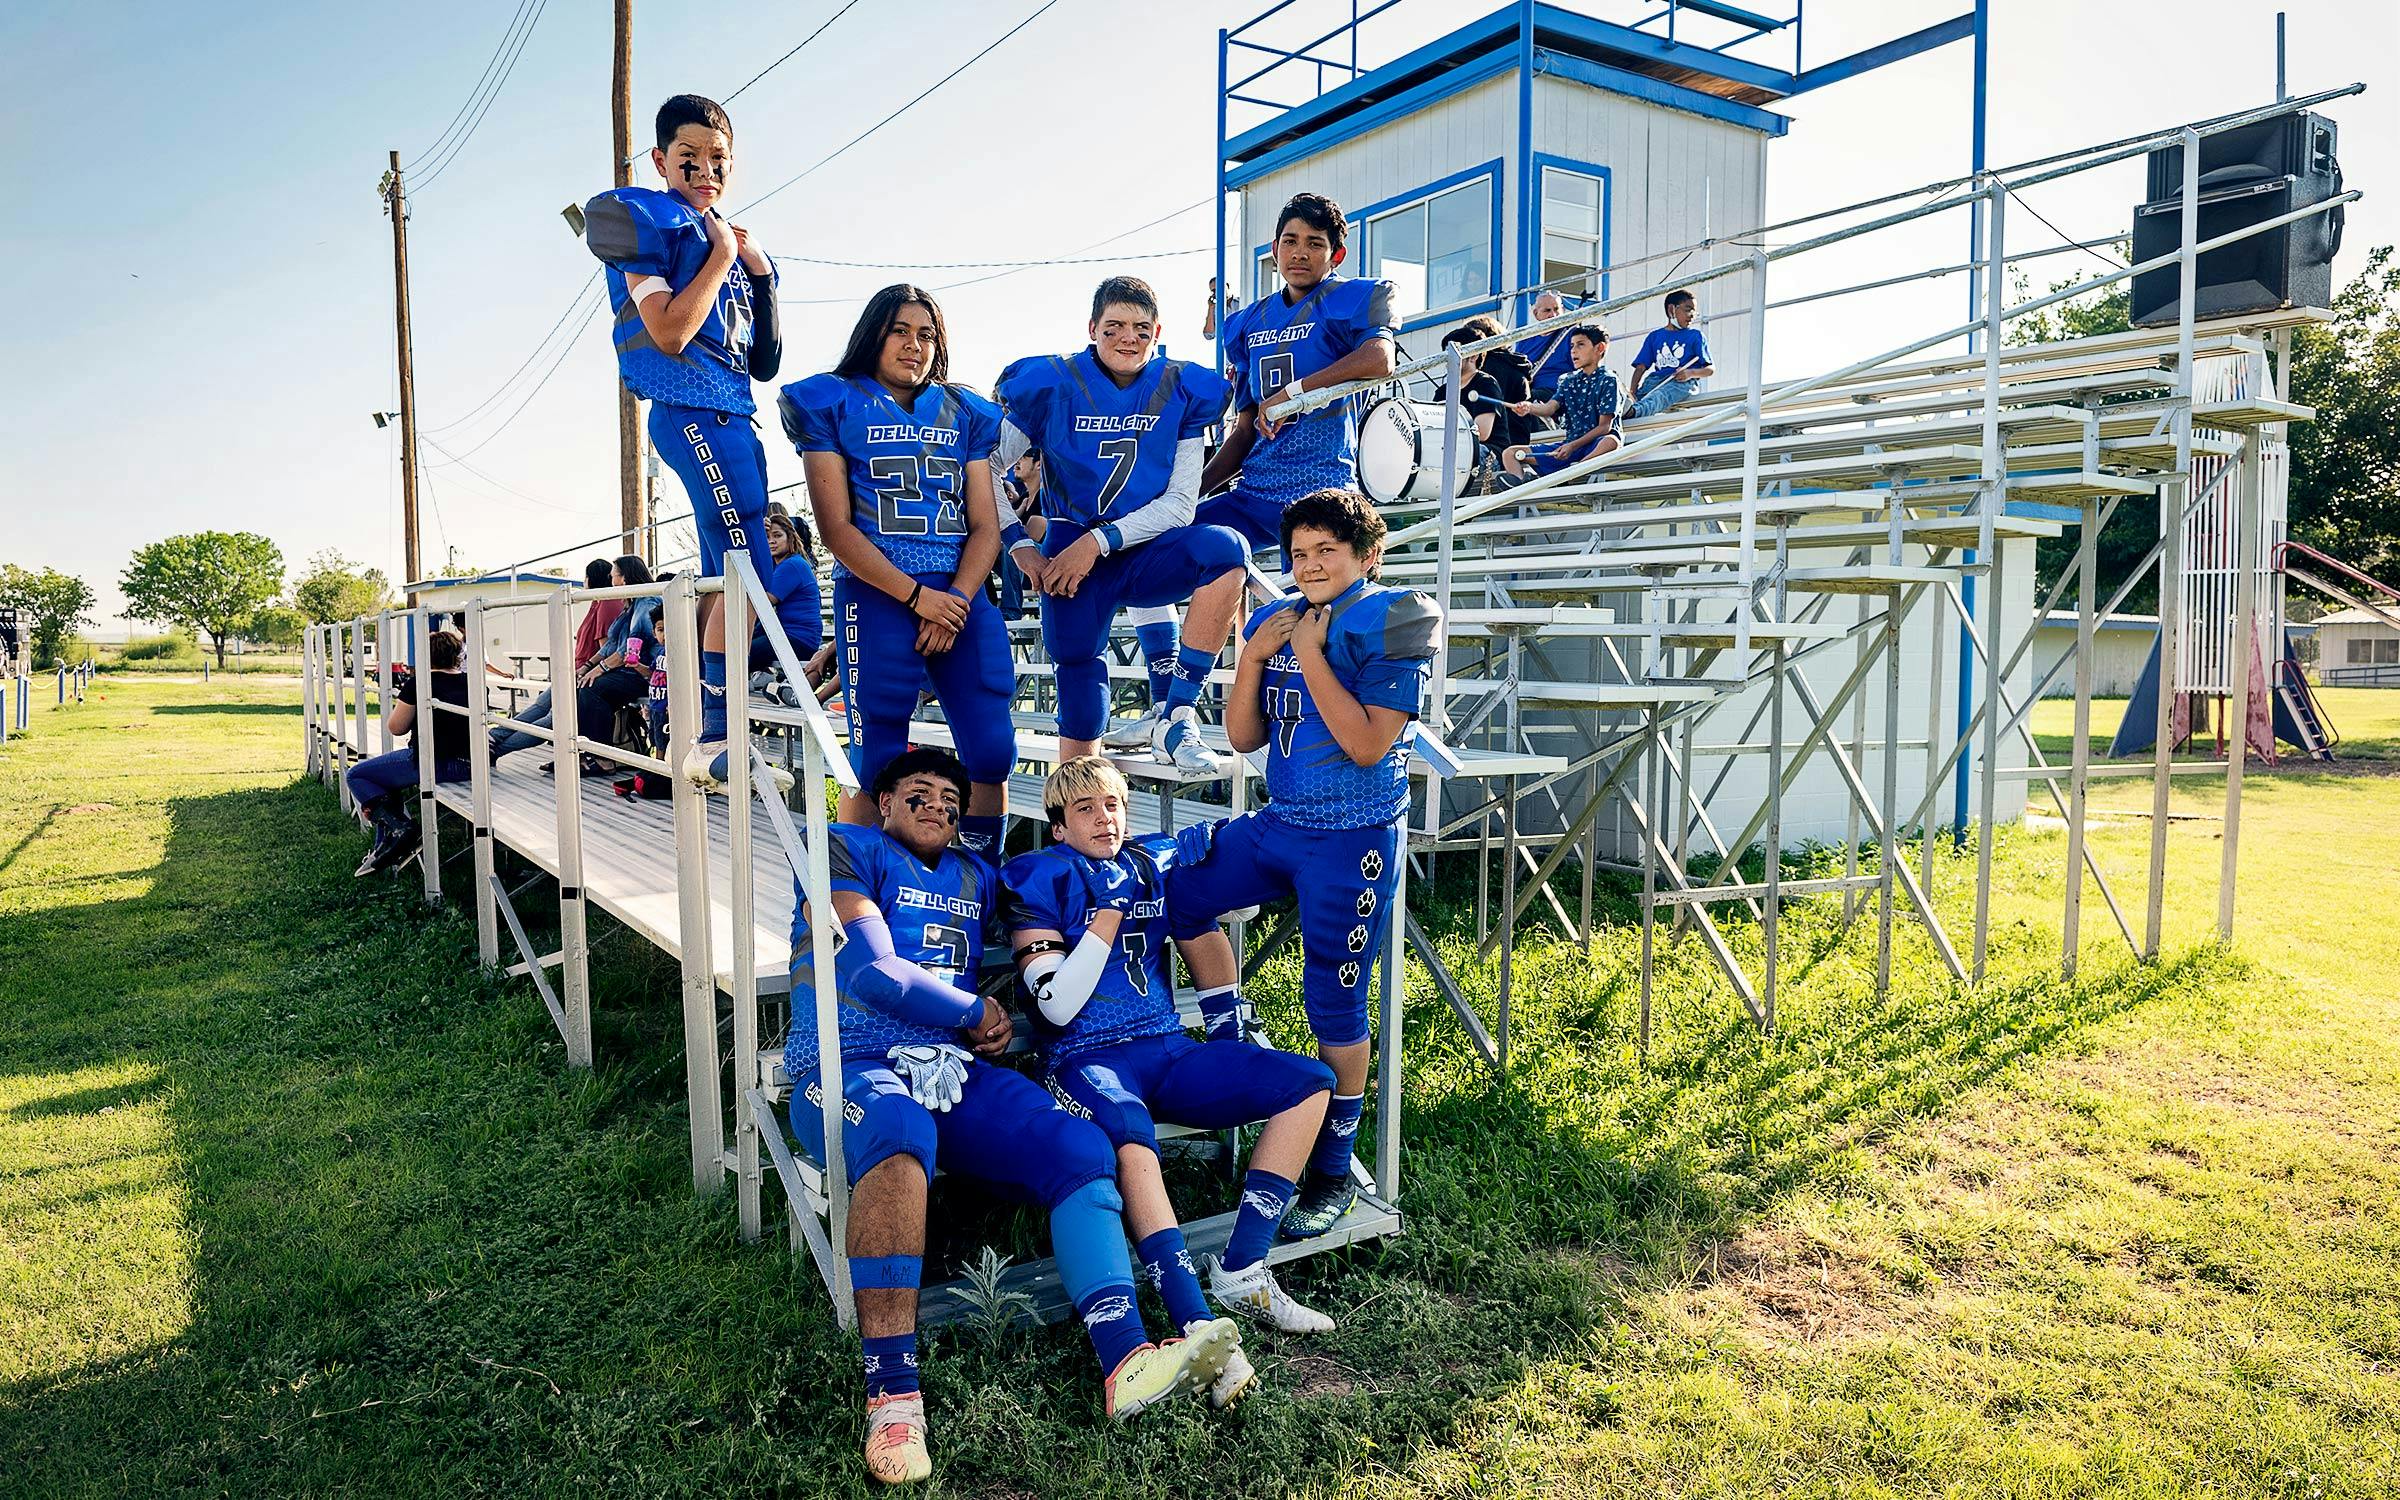 Texas youth football team 'too good' for playoffs, league says